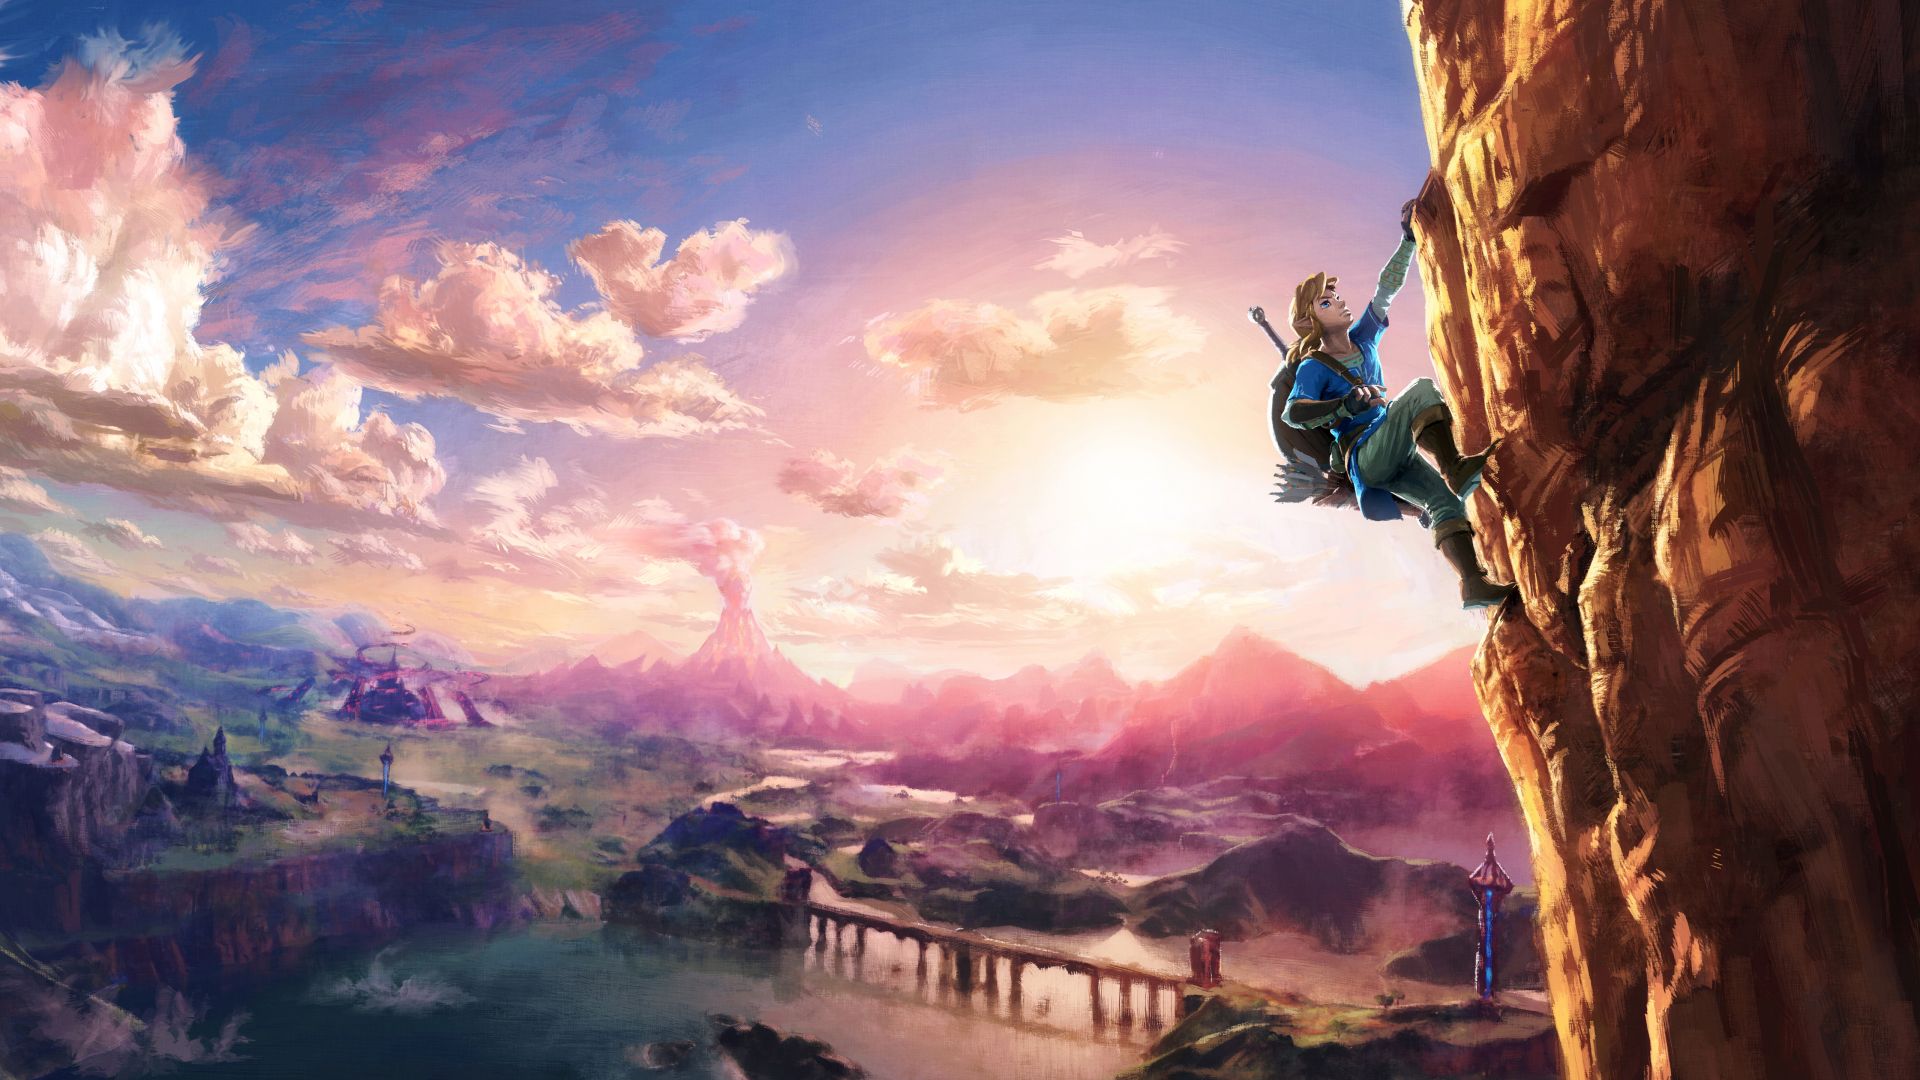 Wallpaper The Legend of Zelda: Breath of the Wild video game, gaming